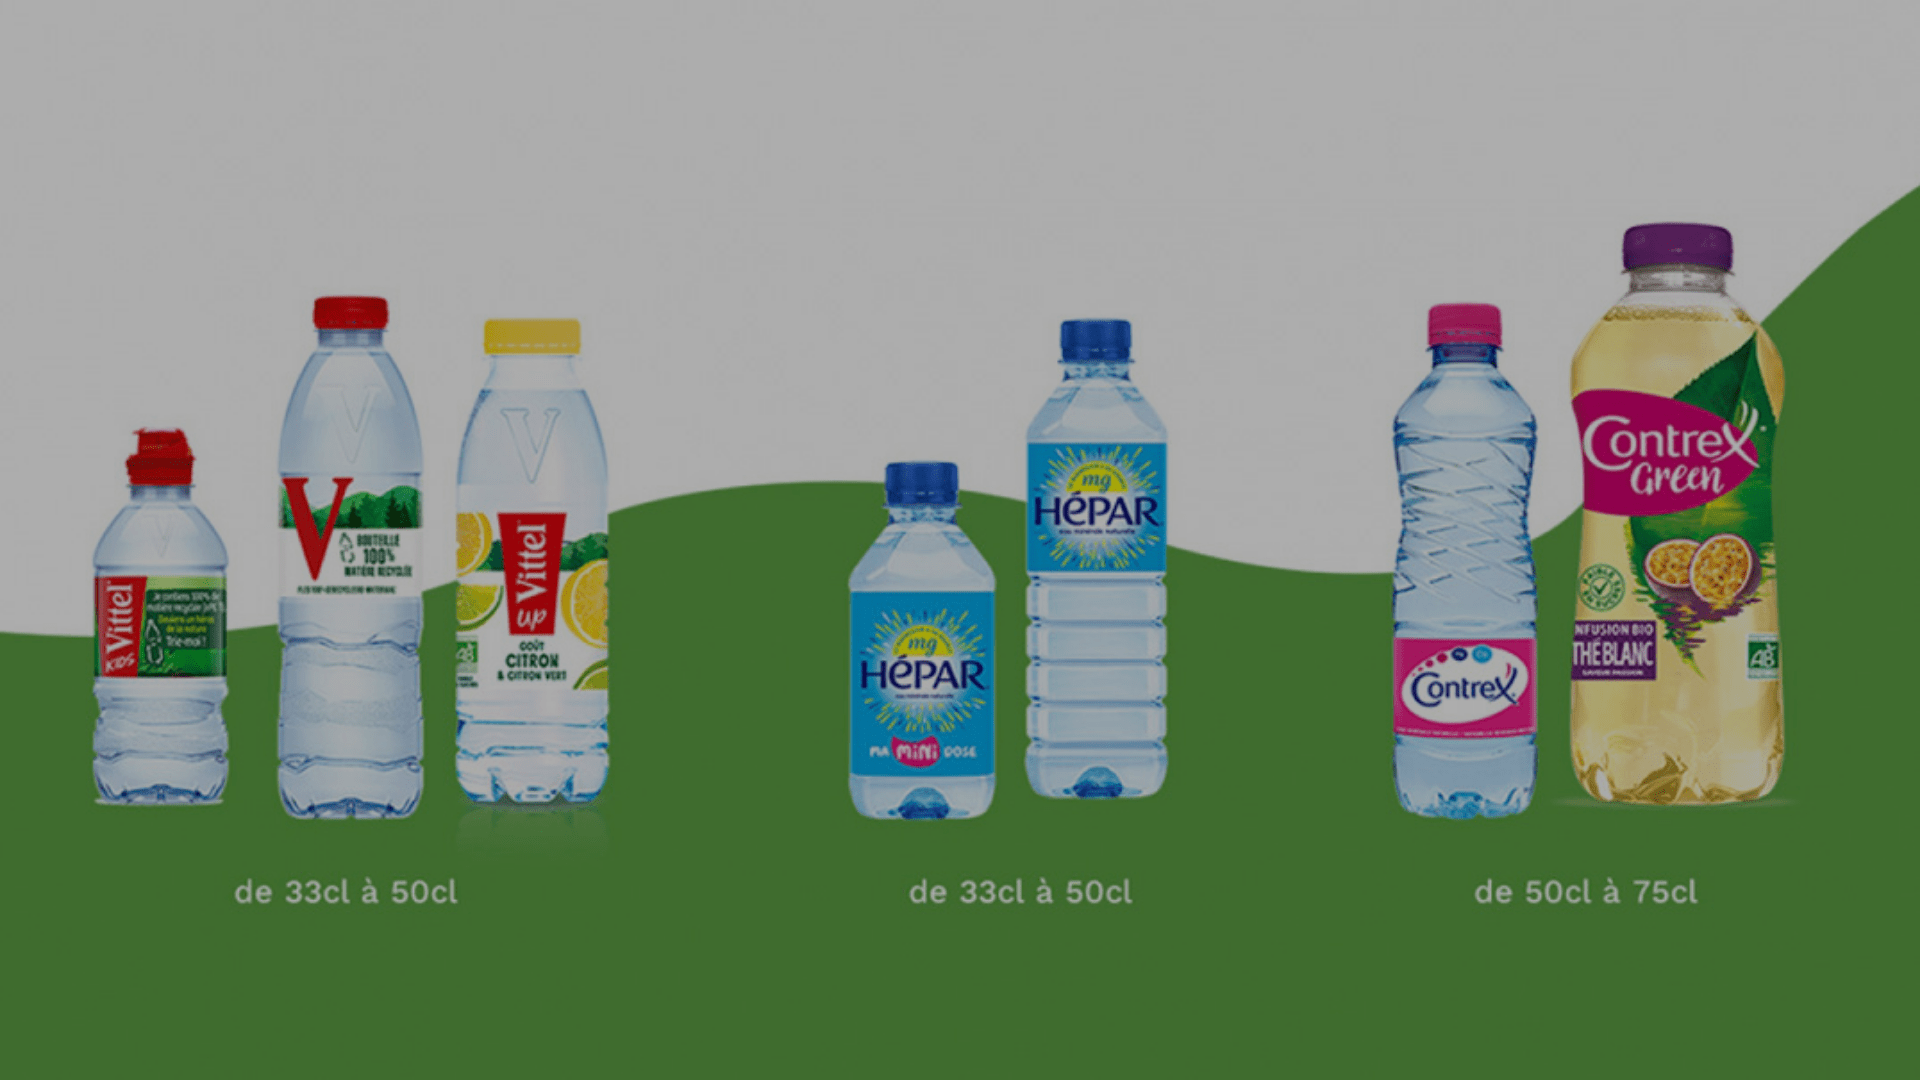 Nestlé Waters France Is Investing €24 Million to Make Bottles from Recycled Plastic